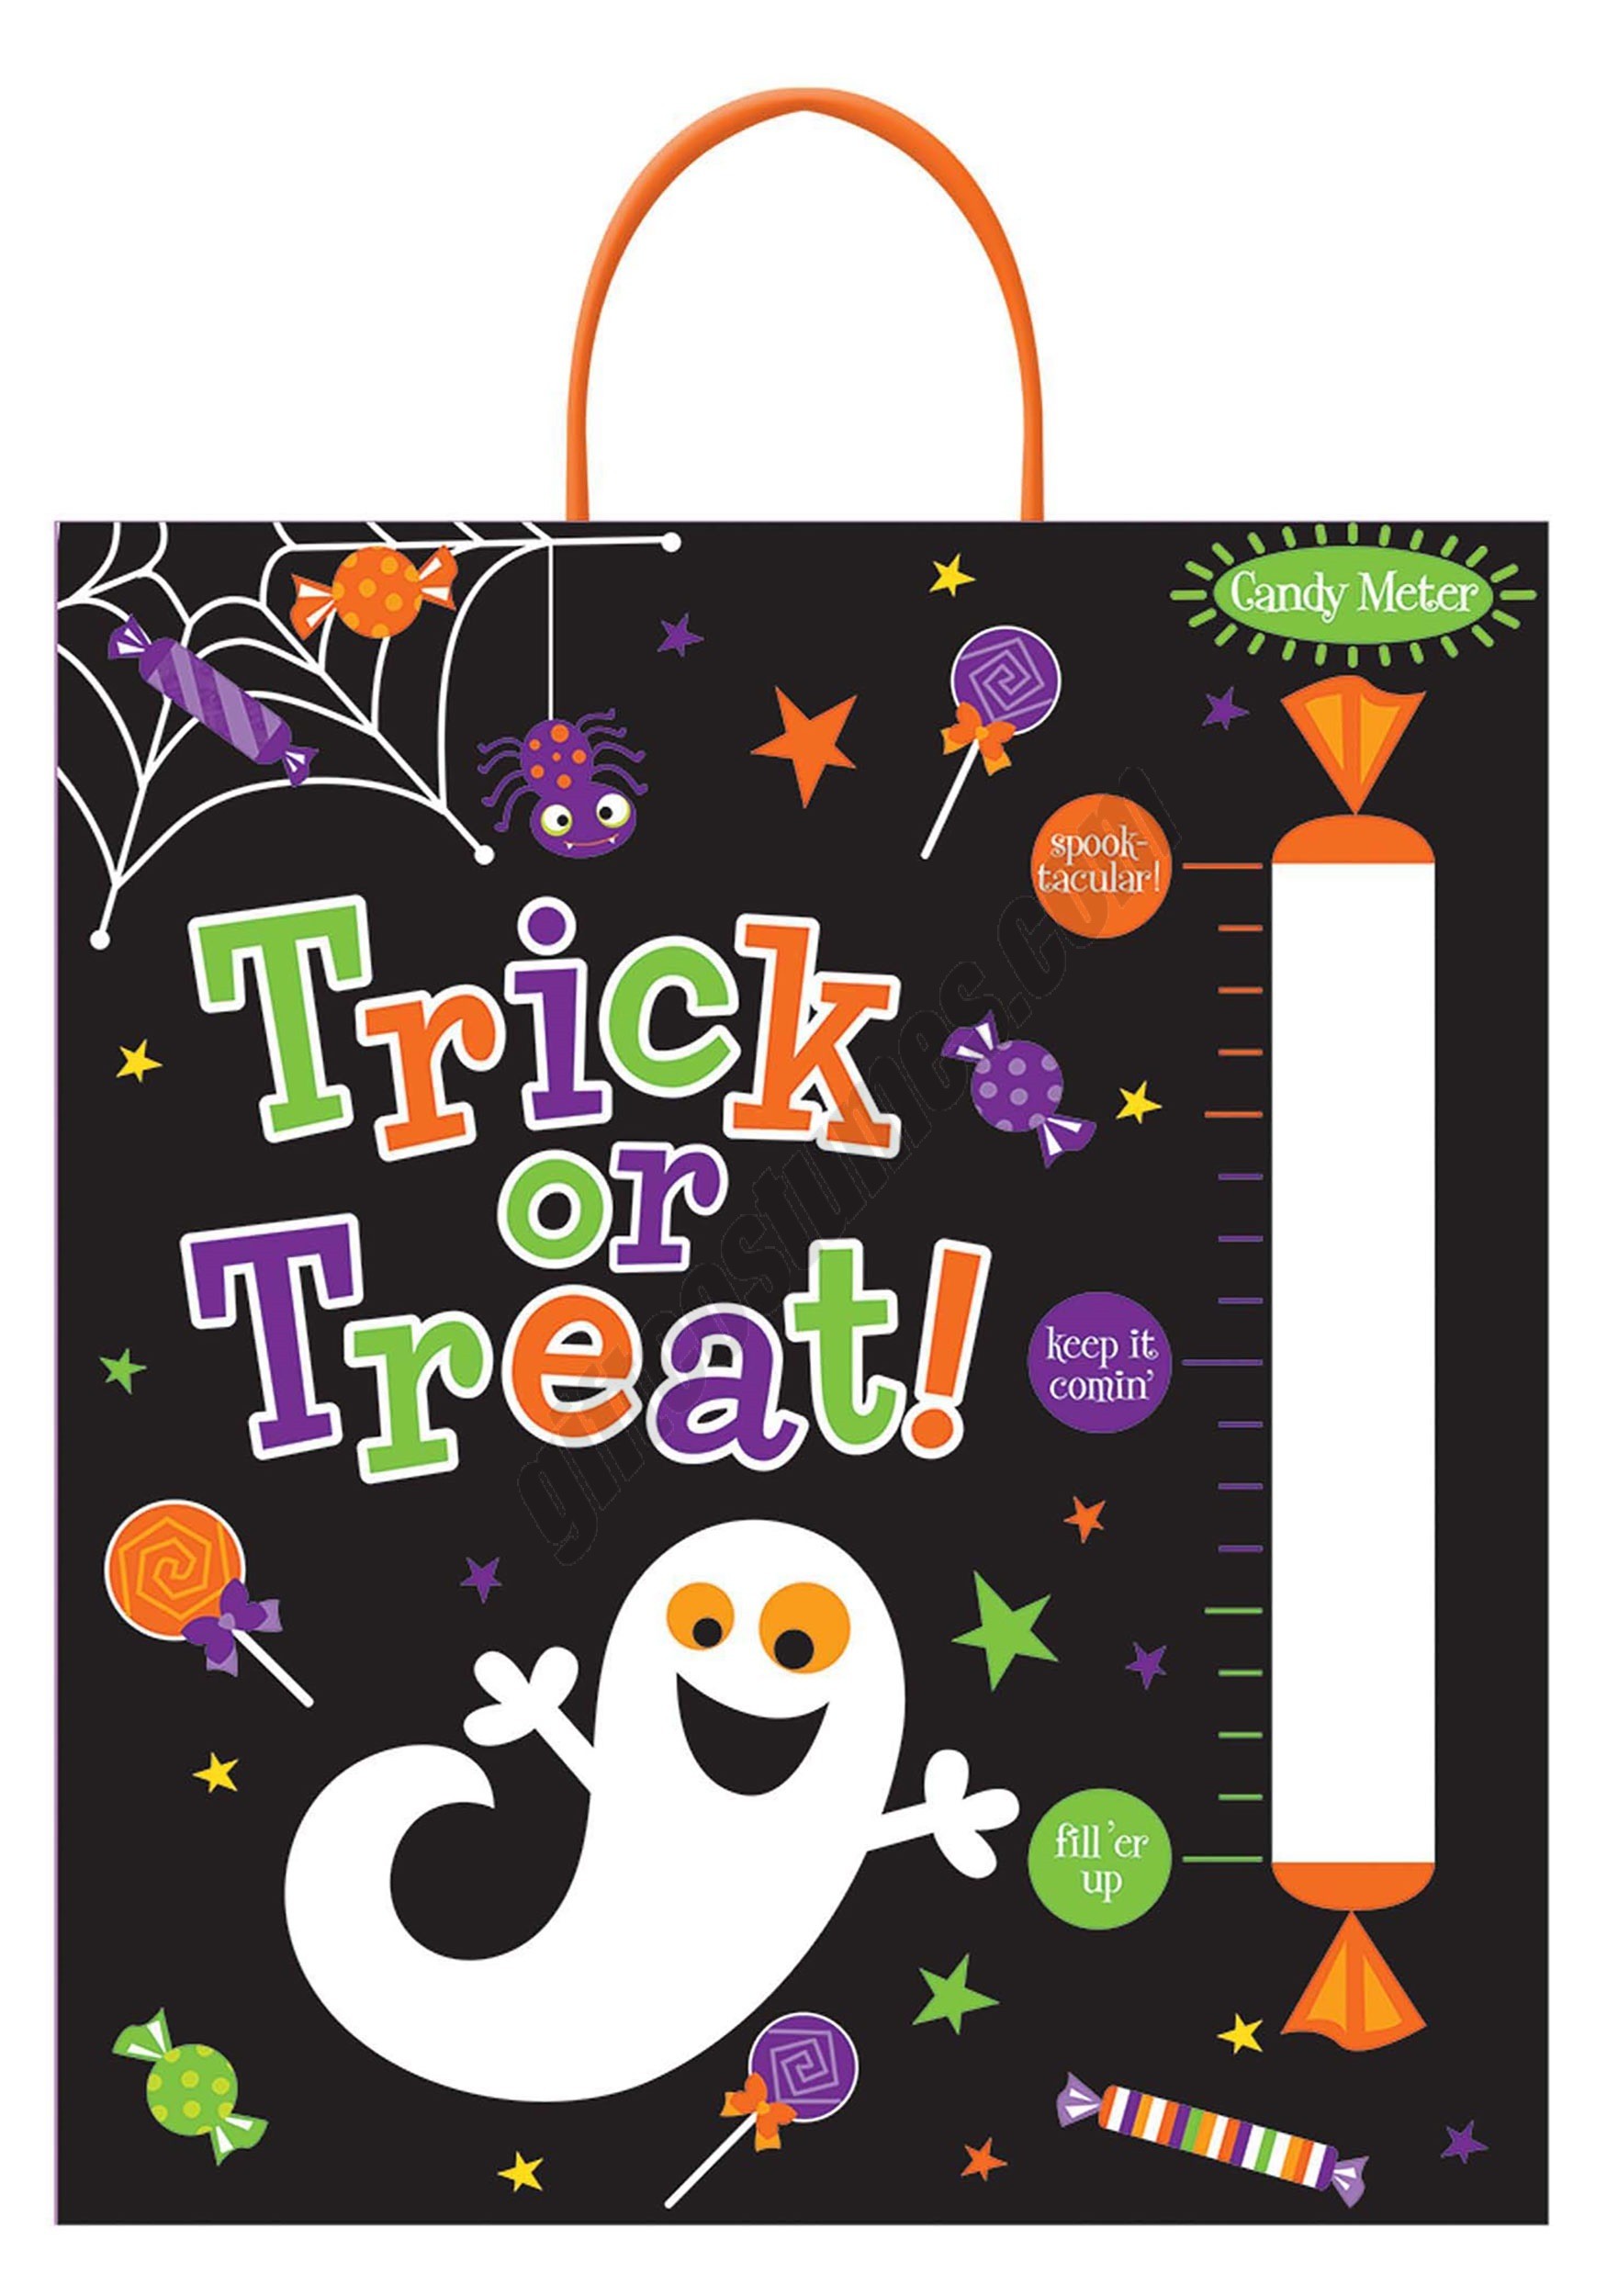 Treat Candy Meter Bag Promotions - Treat Candy Meter Bag Promotions